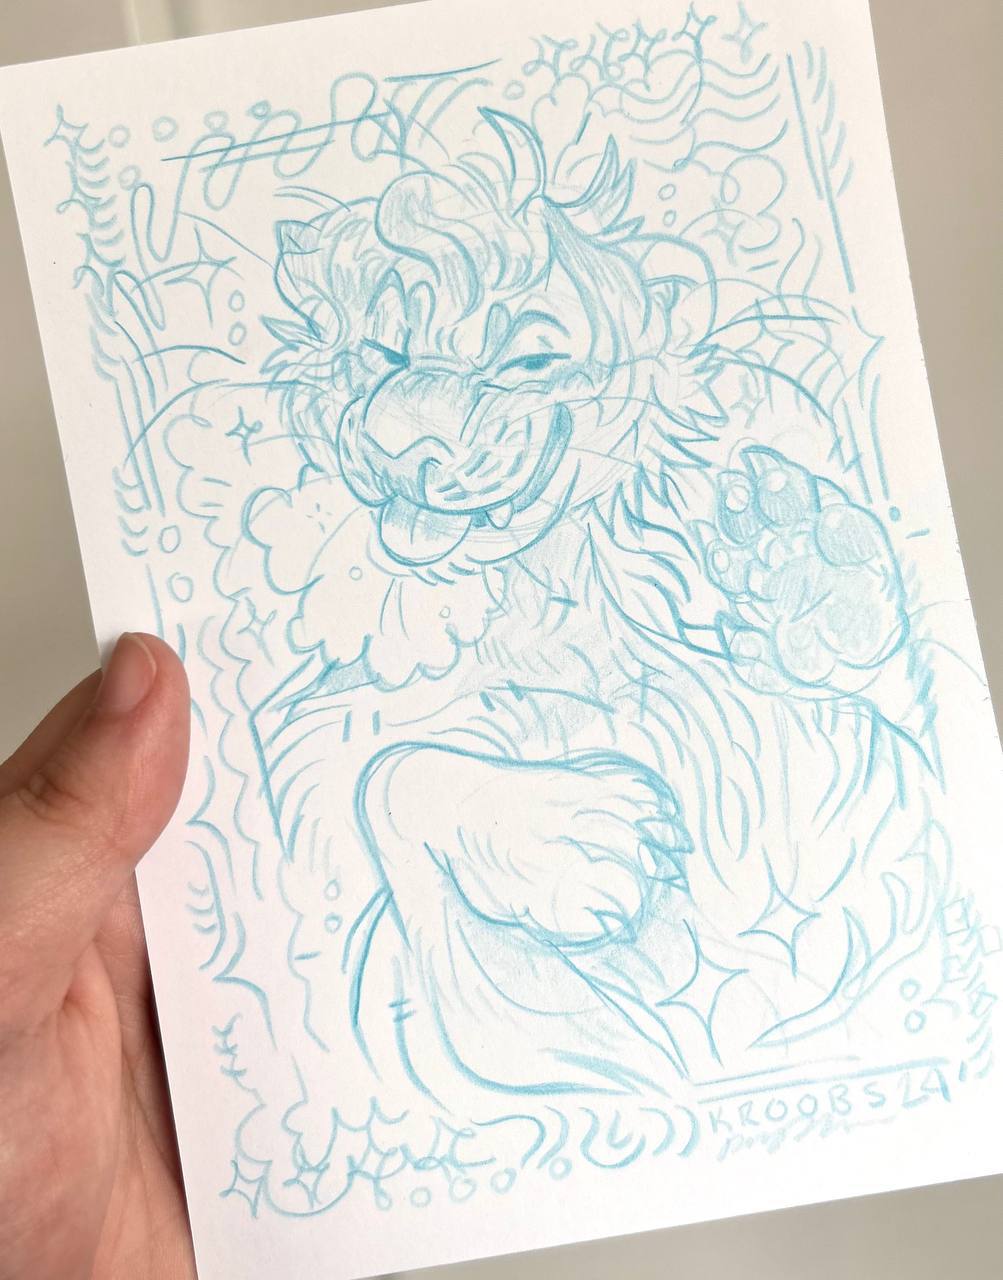 Trad Portrait! Open for these!